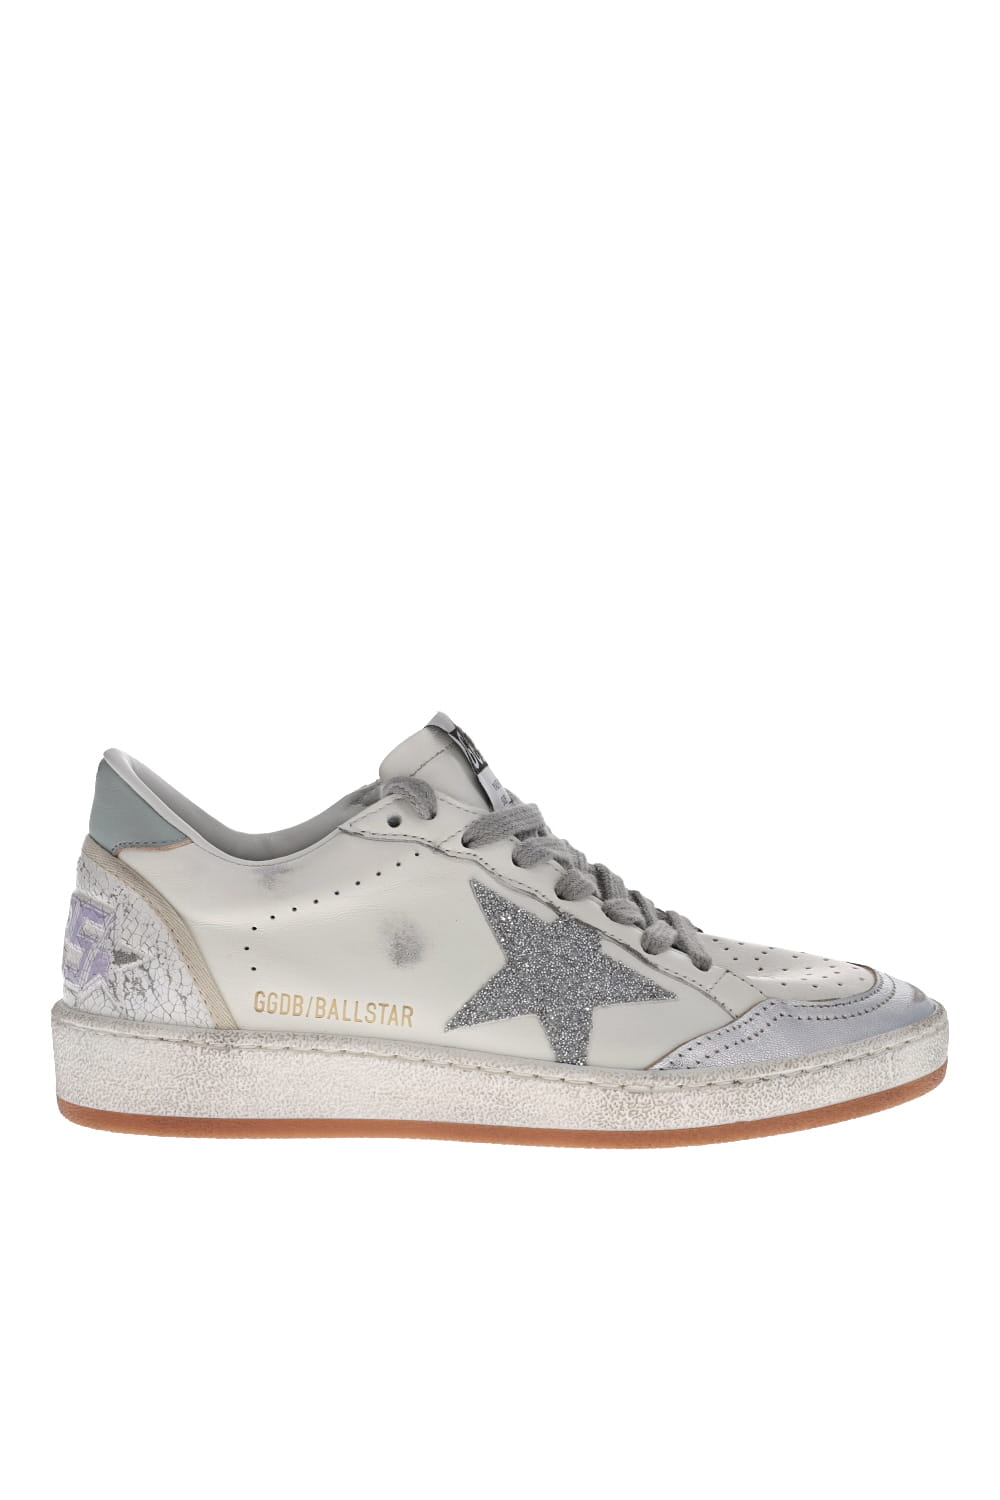 Golden Goose BALLSTAR NAPPA UPPER CRYSTAL STAR NAPPA AND LEATHER HEEL CRACK SPUR GWF00117.F005365.11707 WHITE/SILVER/AQUA GRAY/ ORCHID HUSH